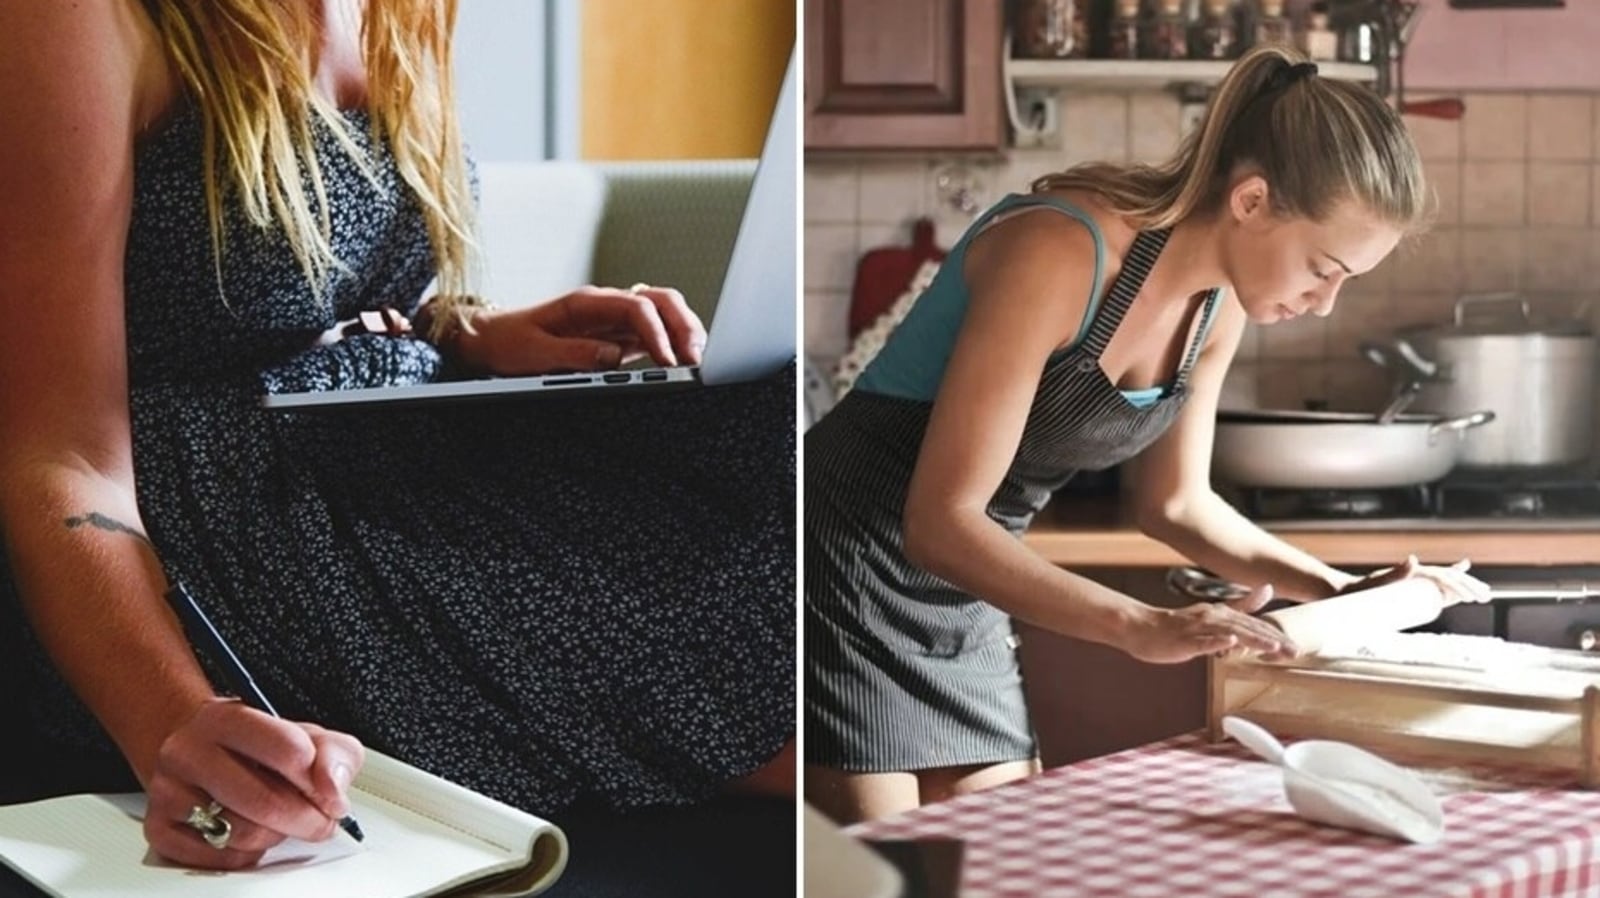 Working woman vs housewife; is one more stressed than the other? Experts answer Health picture